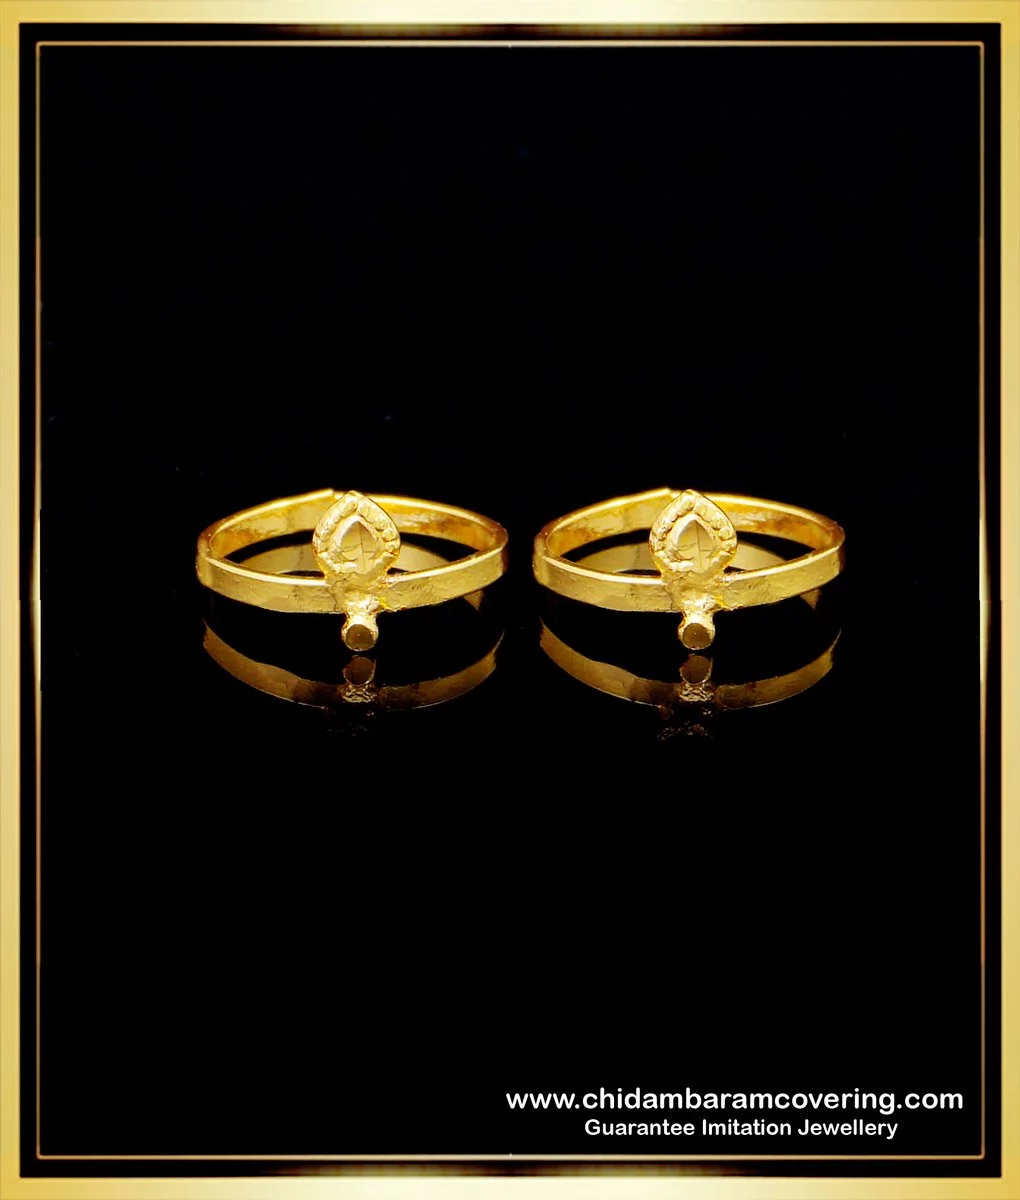 Amazon.com: 10K Yellow Gold 5mm Light Weight Half Round Band Ring Size 4:  Clothing, Shoes & Jewelry